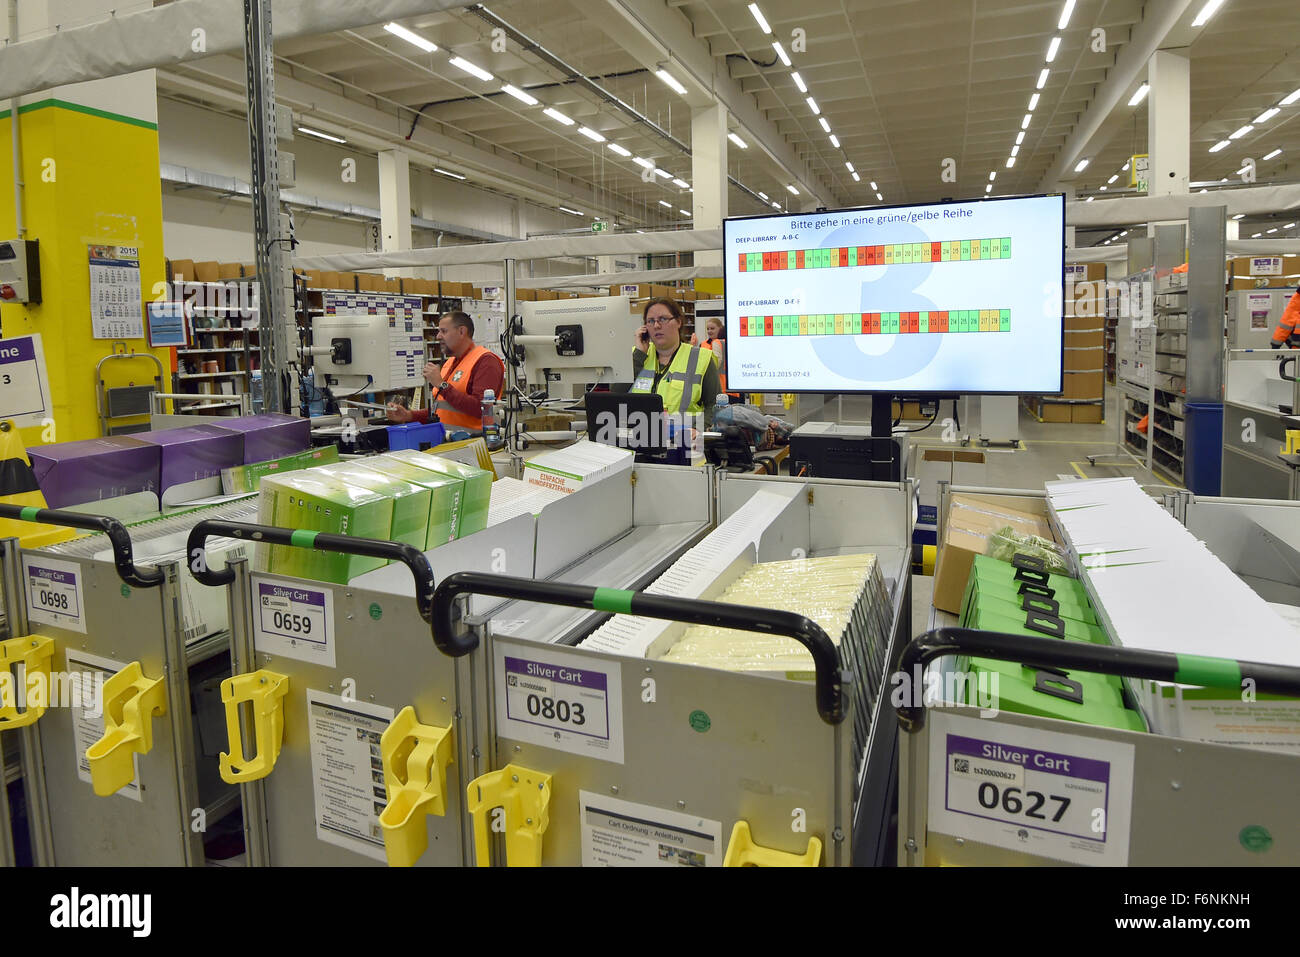 Brieselang, Germany. 17th Nov, 2015. A staff member organises mail orders  at the logistics centre of online retailer Amazon in Brieselang, Germany,  17 November 2015. The logistics centre in Brieselang is Amazon's